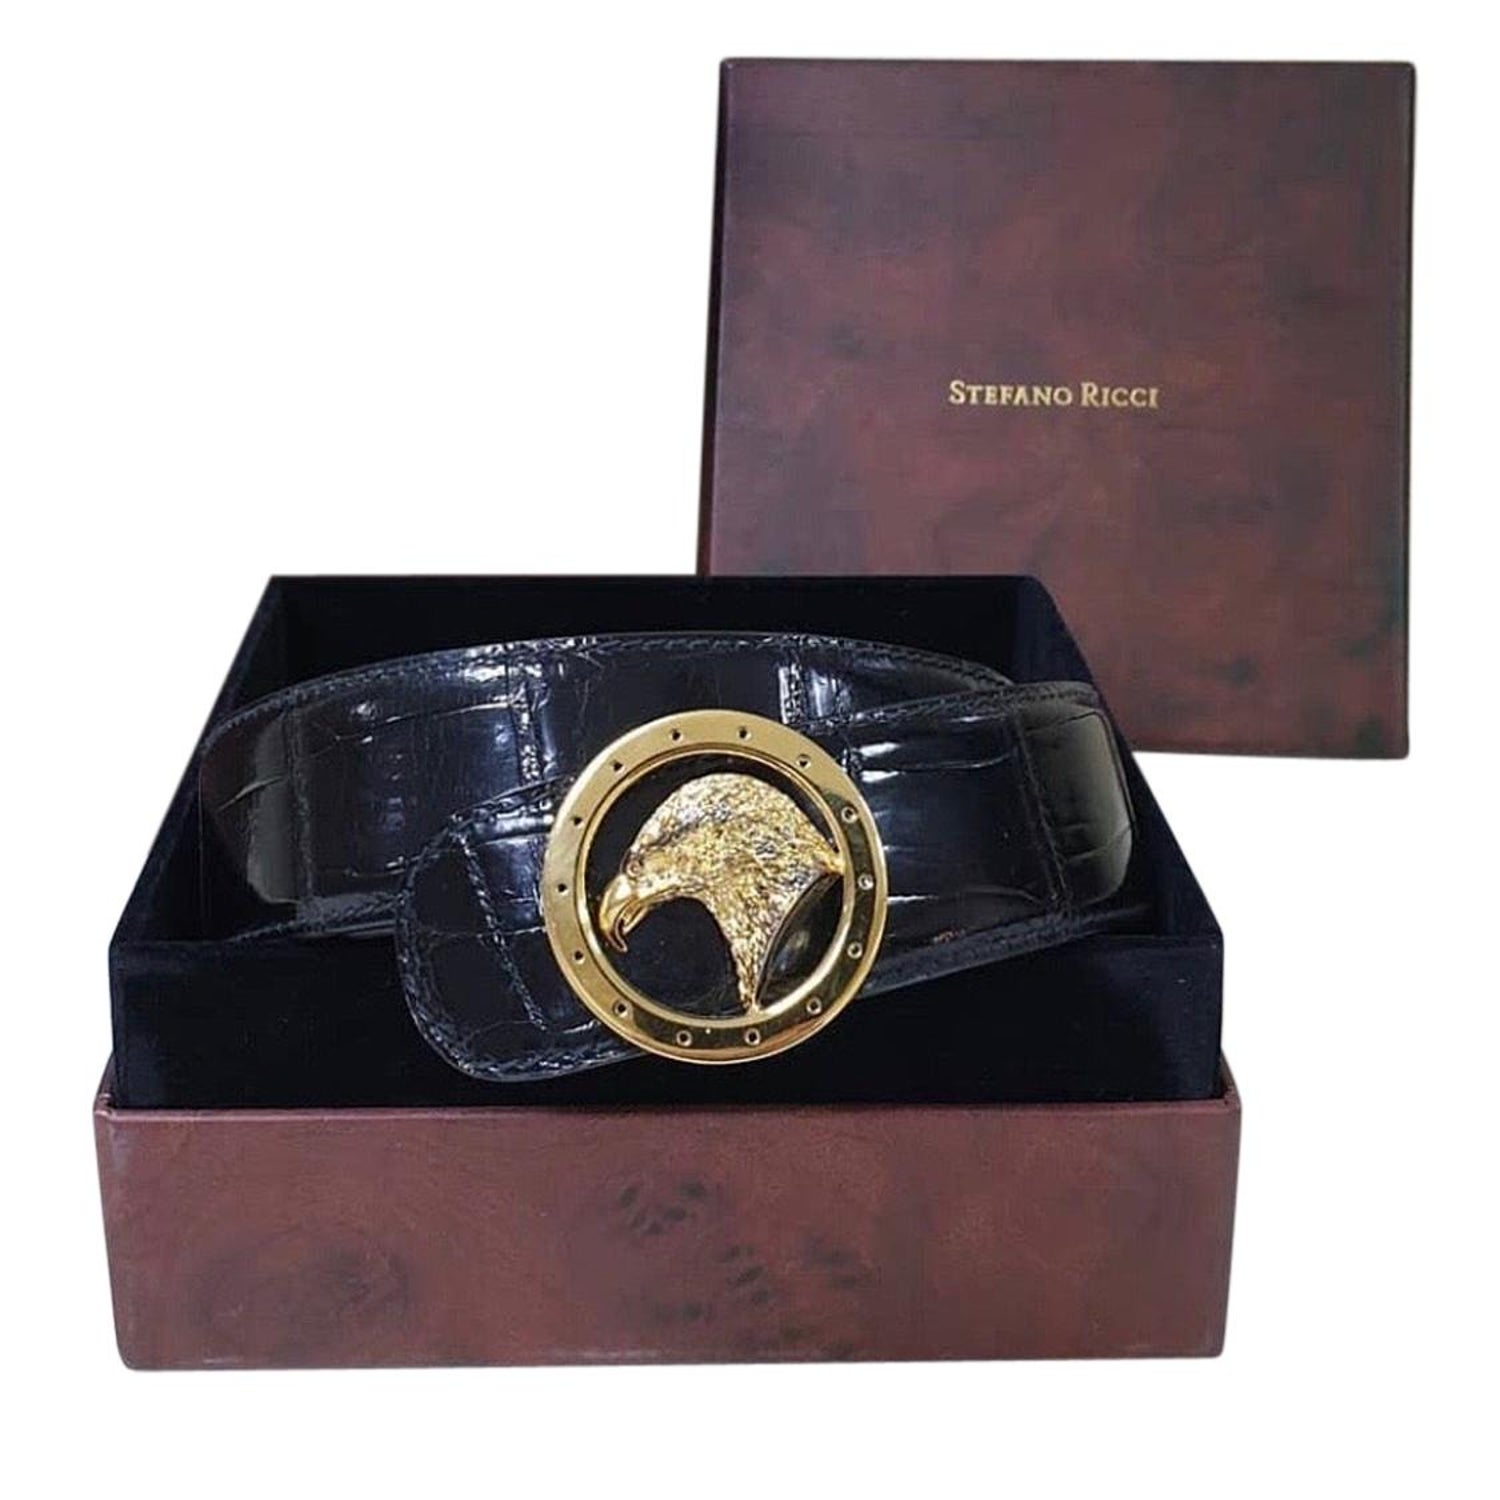 Stefano Ricci Belt - For Sale on 1stDibs | stefano ricci belts, stefano  ricci kemer, stefano ricci belt for sale in south africa